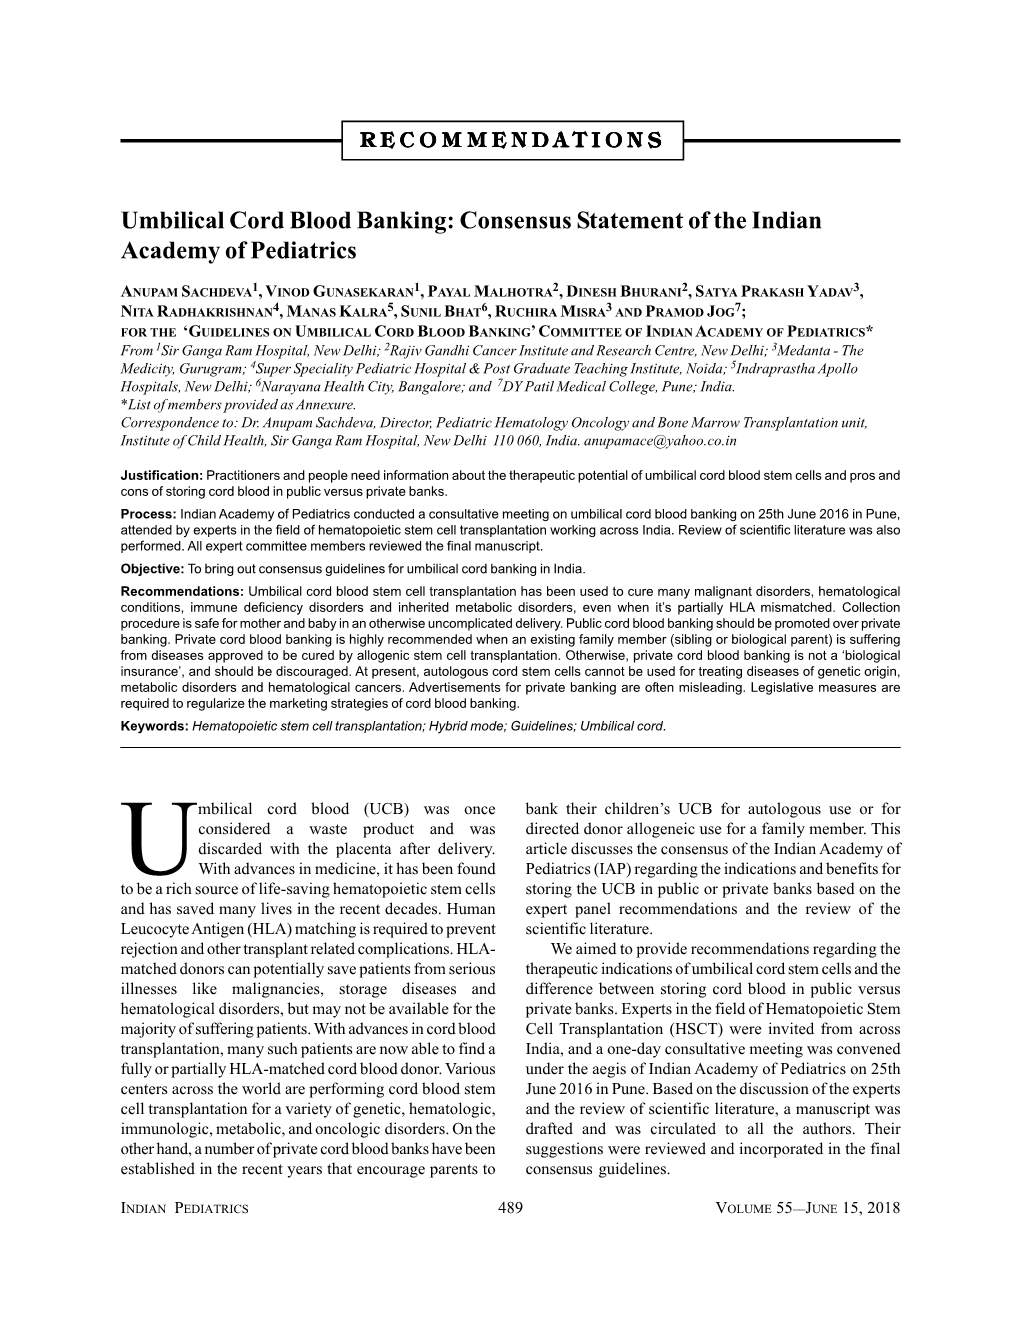 Umbilical Cord Blood Banking: Consensus Statement of the Indian Academy of Pediatrics